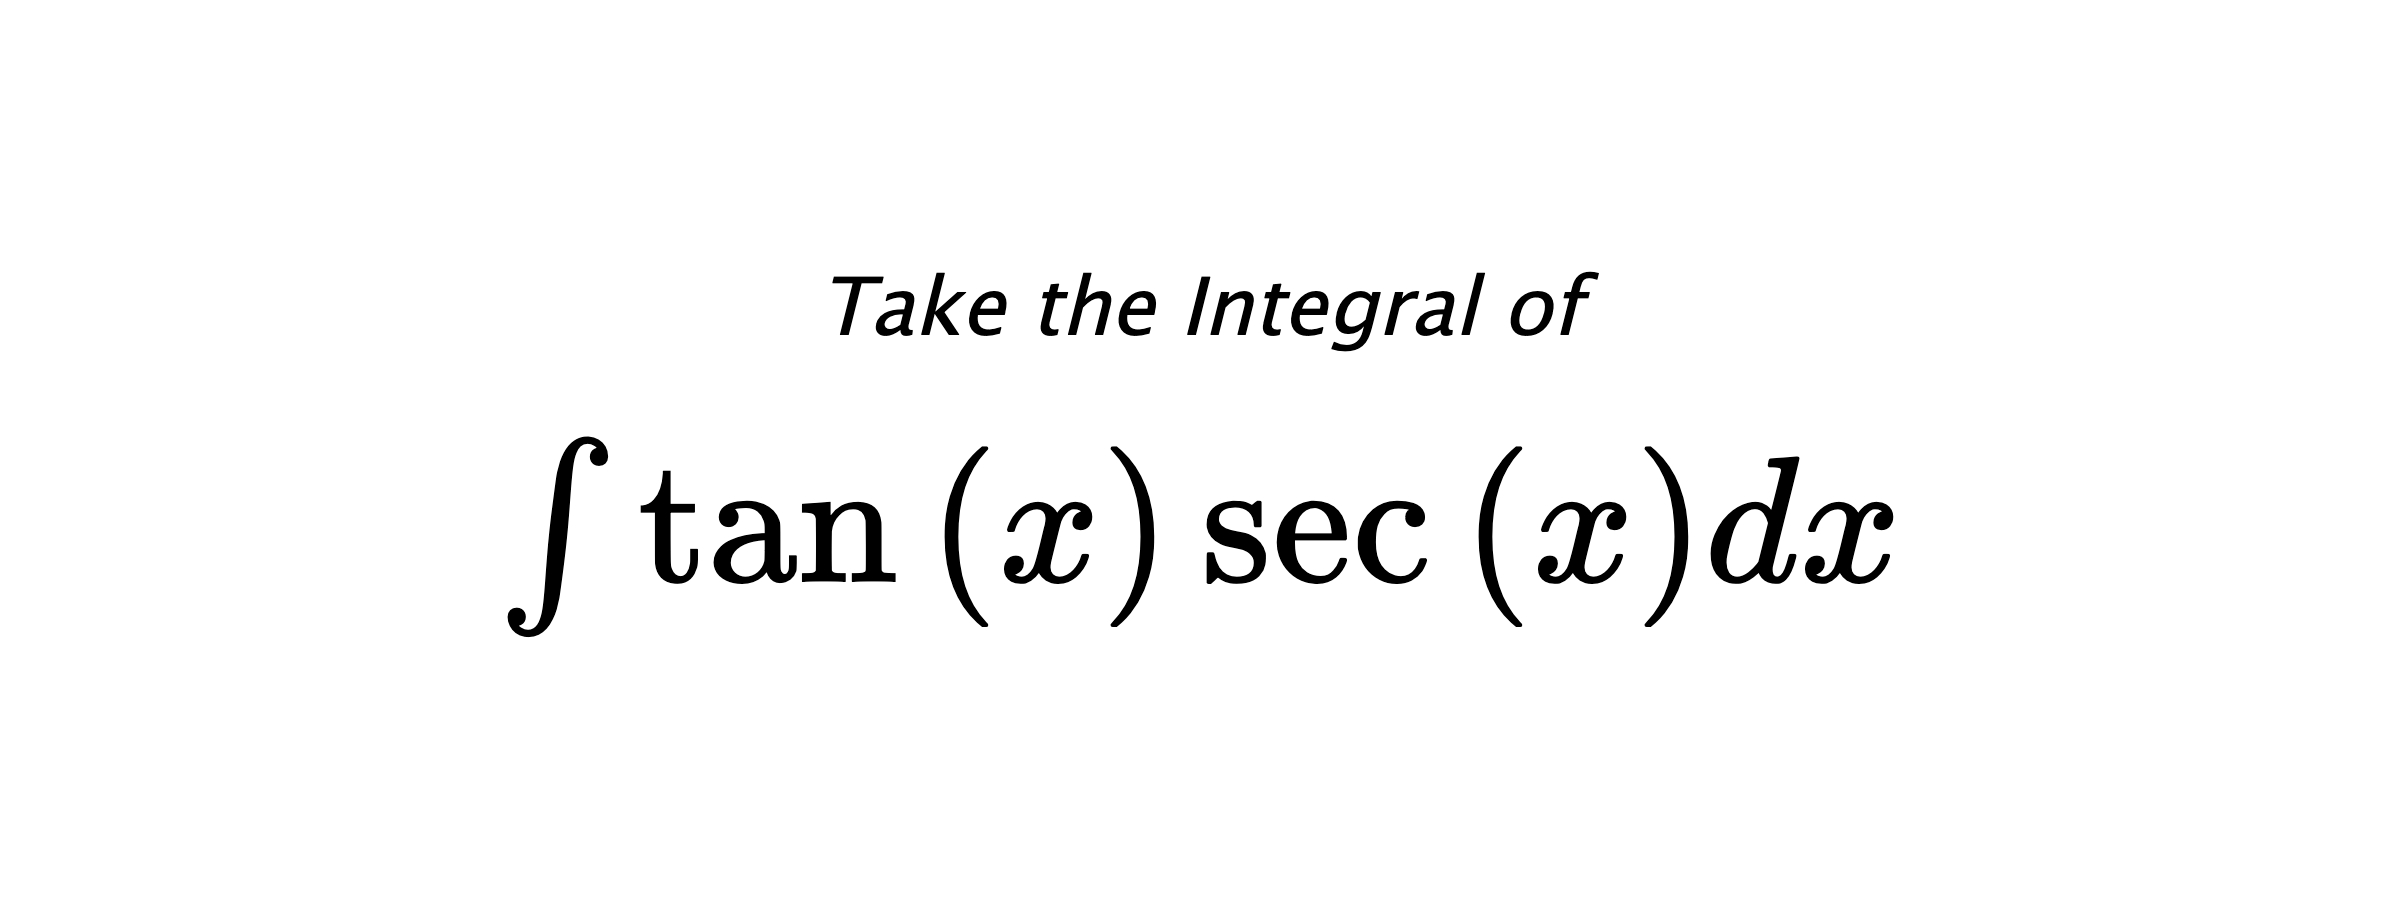 Take the Integral of $ \int \tan{\left(x \right)} \sec{\left(x \right)} dx $